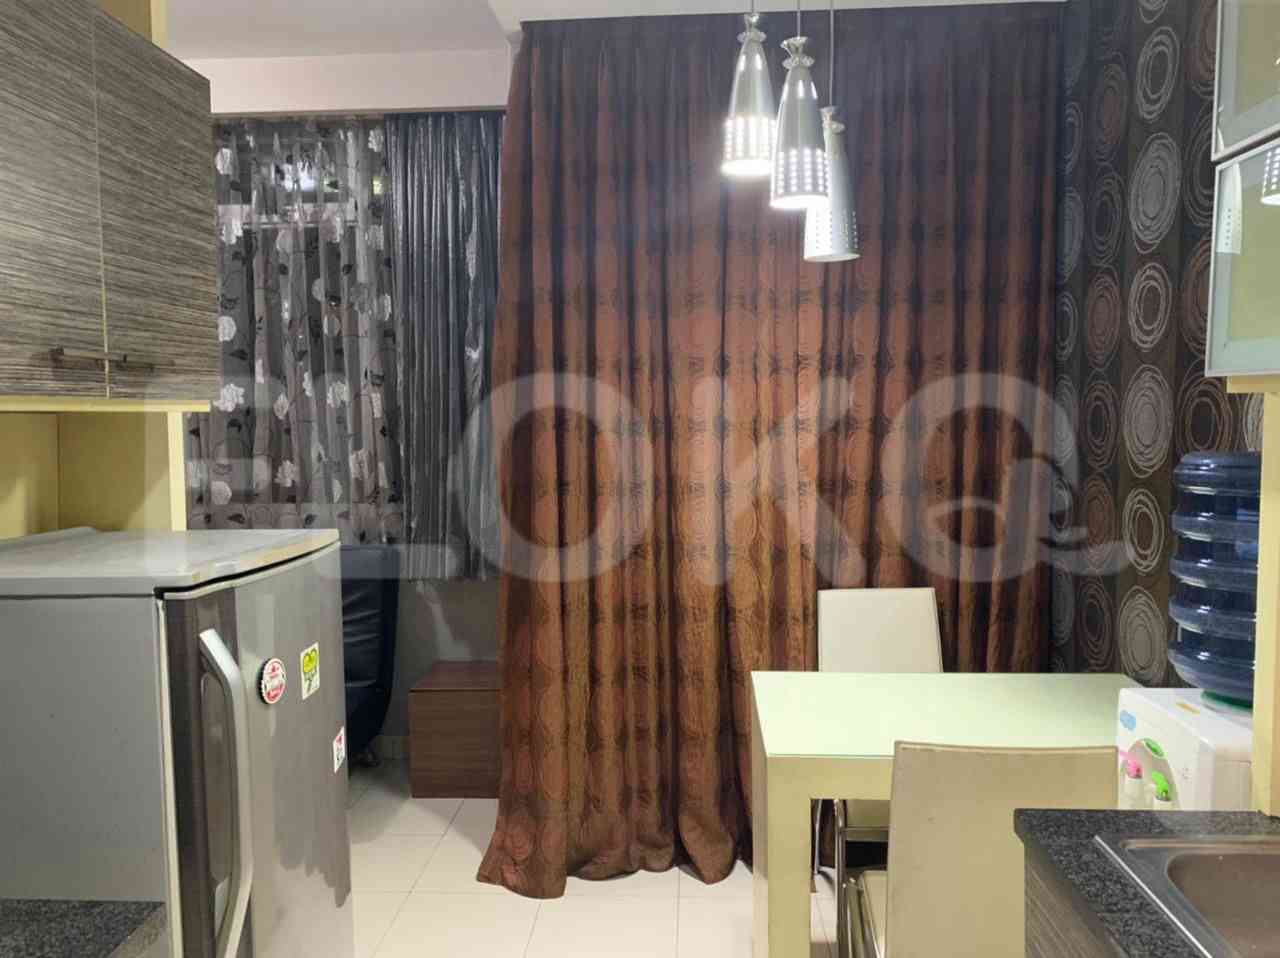 1 Bedroom on 6th Floor for Rent in Kuningan Place Apartment - fkued1 11